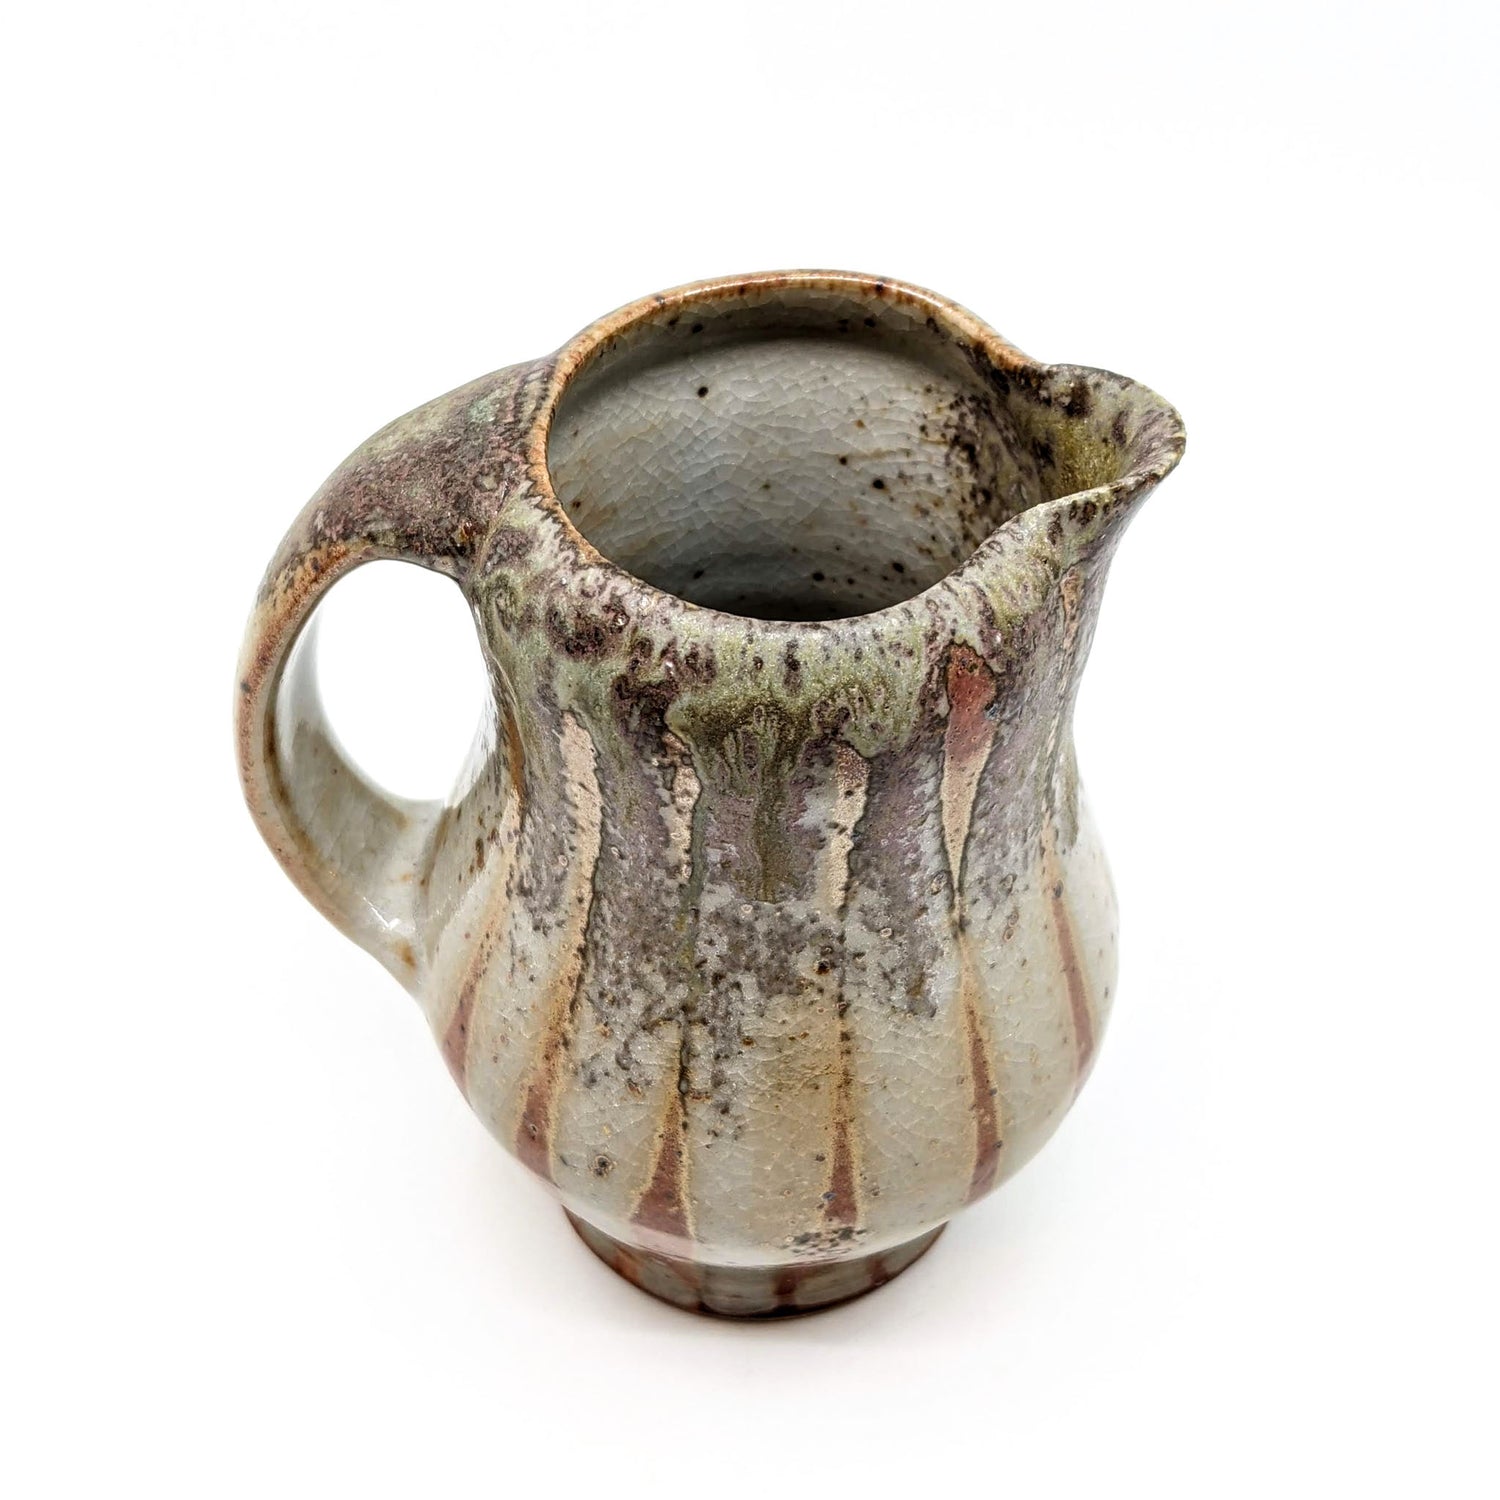 Creamer container by Maryland potter Matthew Hyleck. 